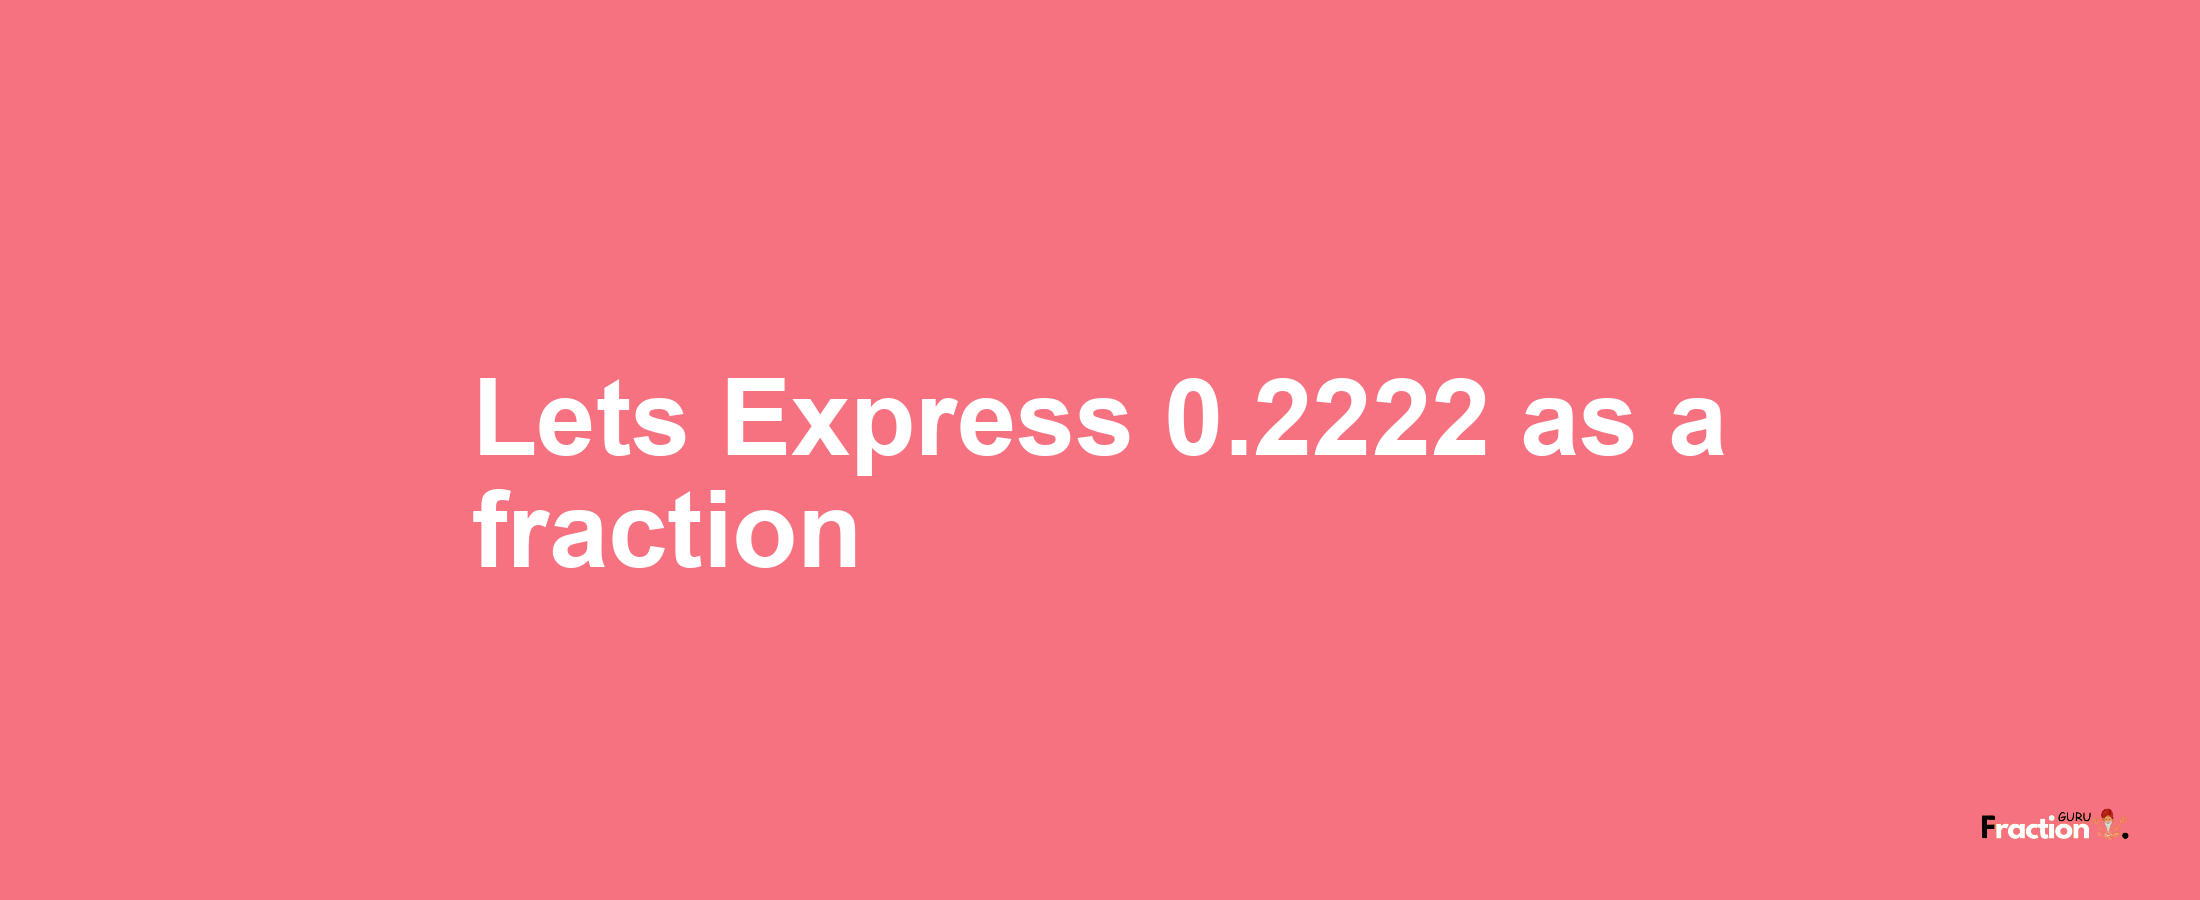 Lets Express 0.2222 as afraction